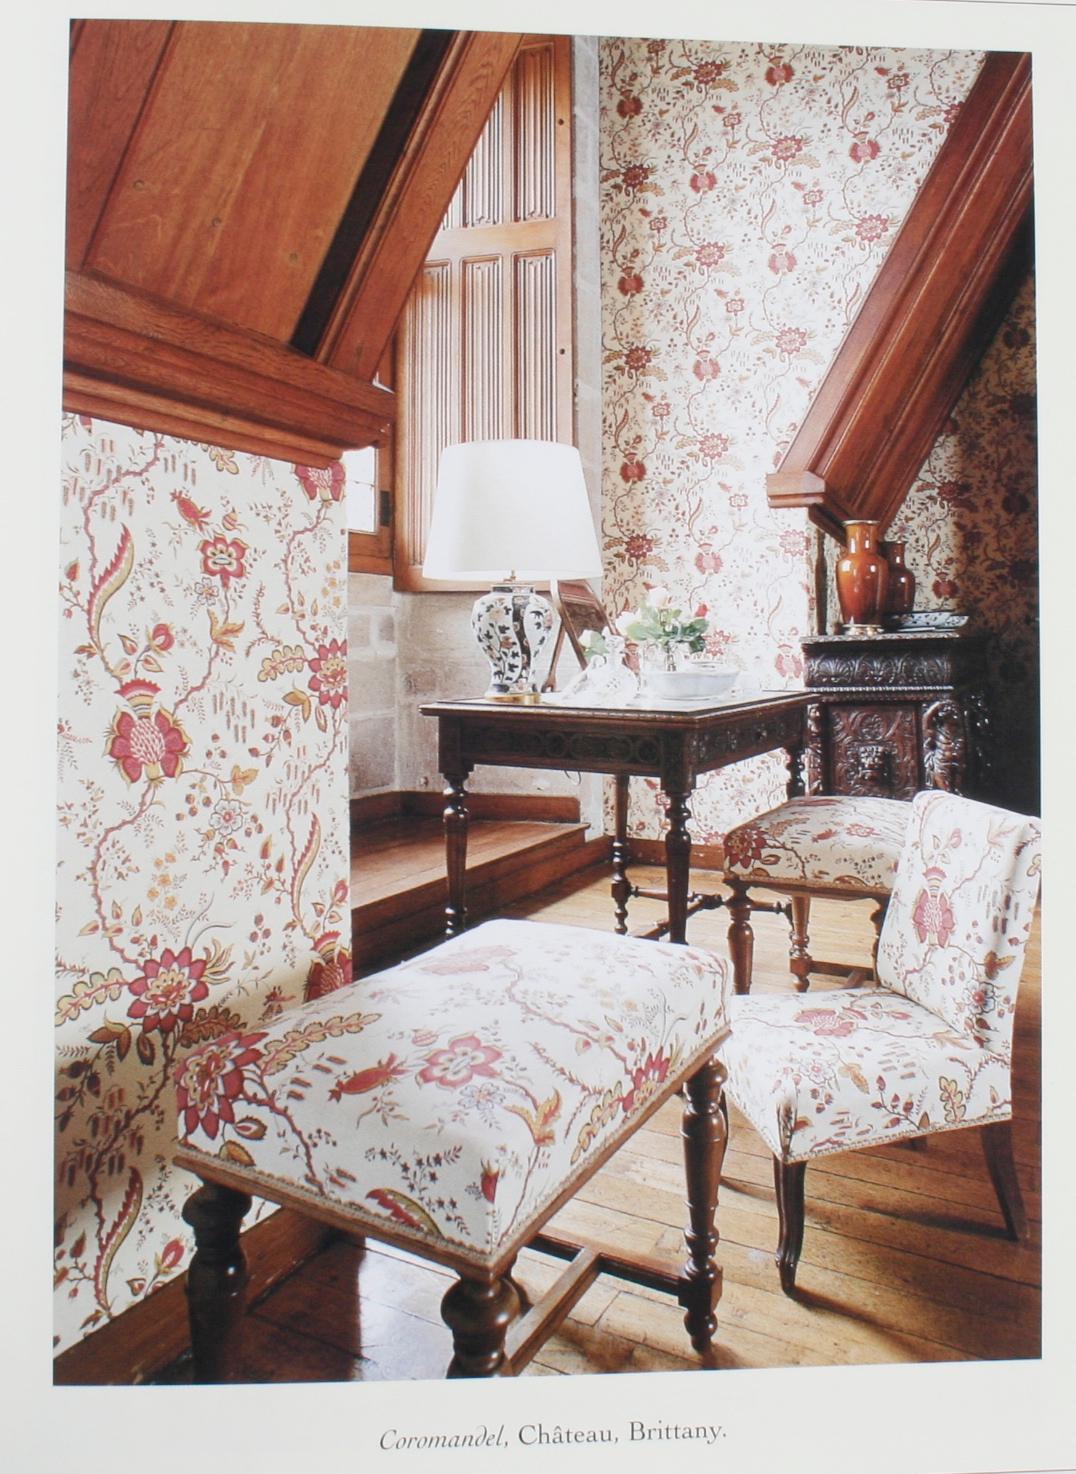 Braquenié French Textiles and Interiors since 1823, Jacques Sirat, First Edition 1